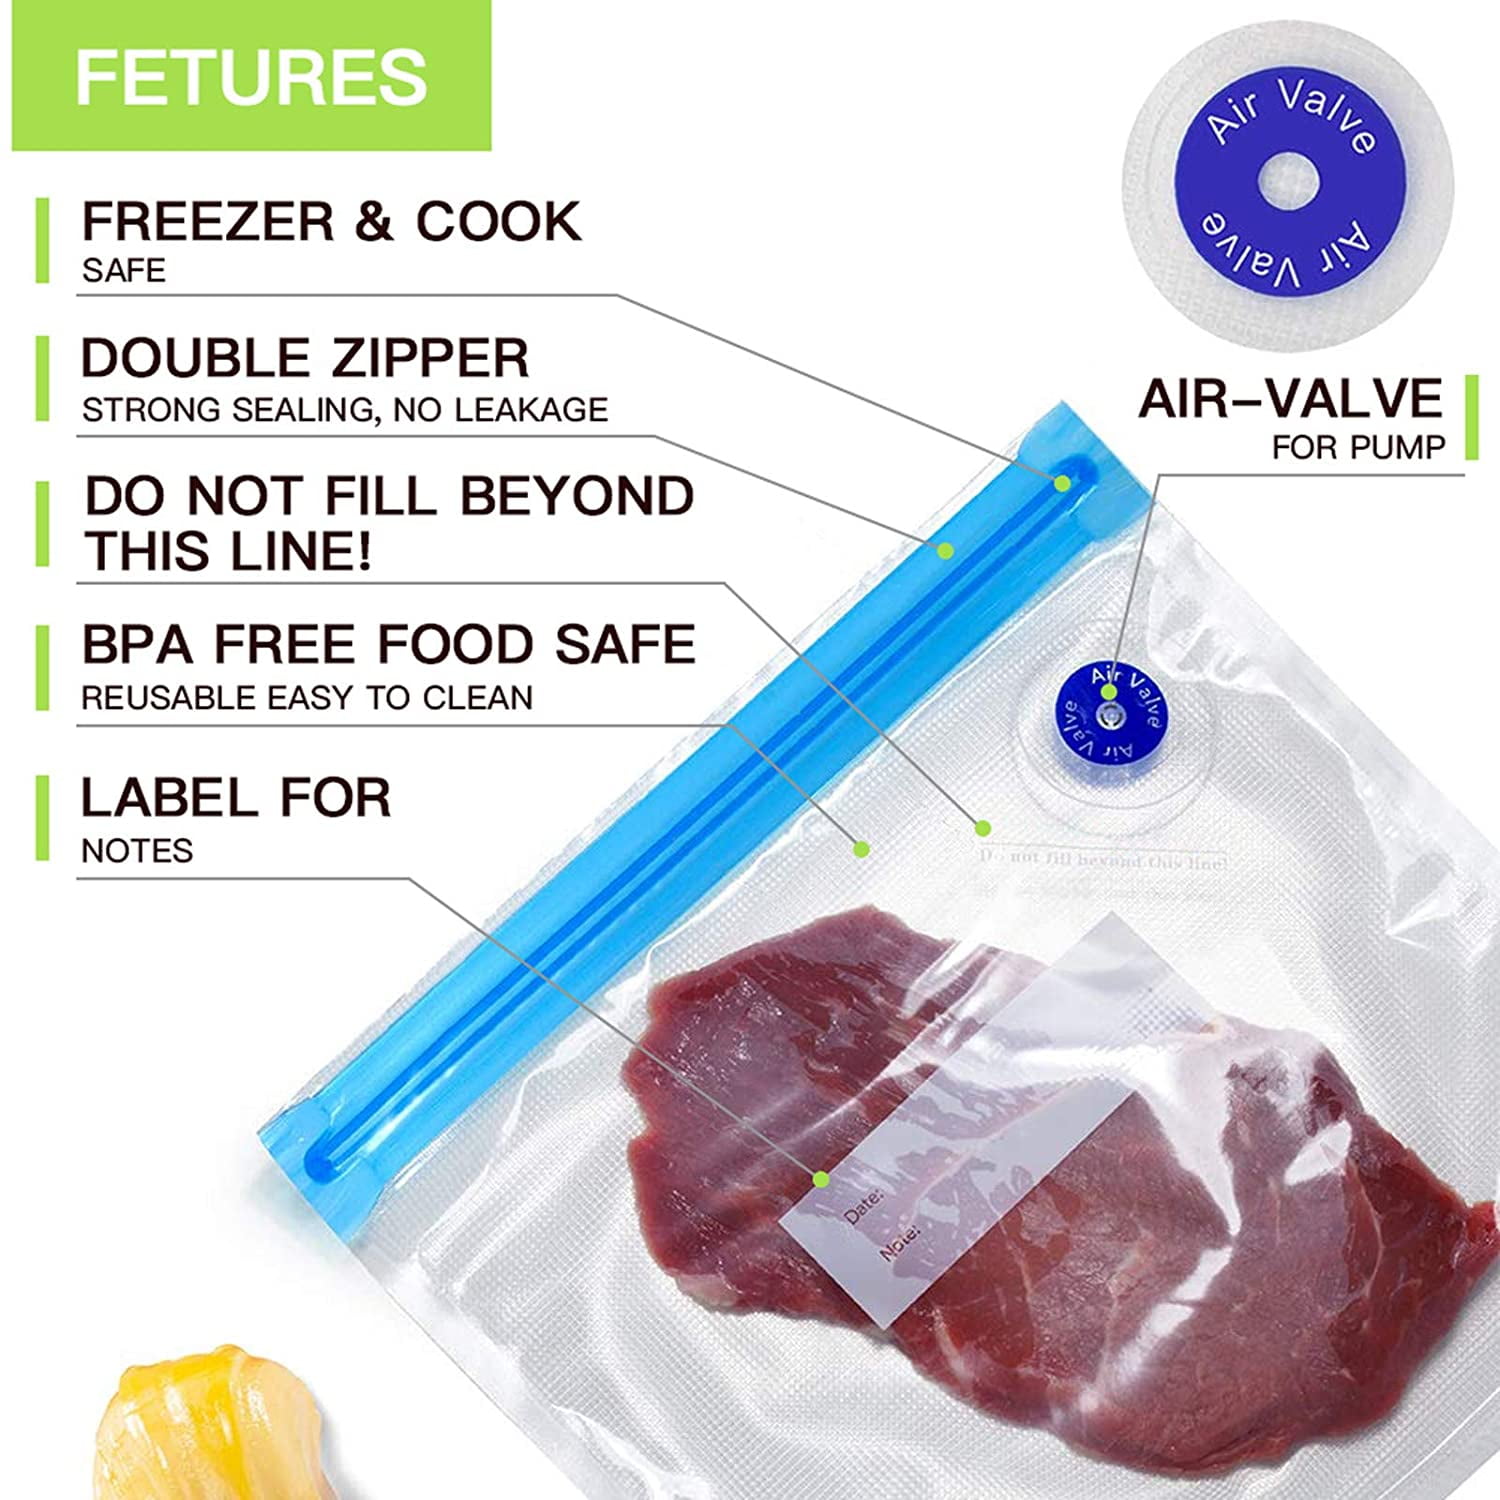  MOMODA Sous Vide Cooking Bags - Set of 20, BPA-Free Reusable  Vacuum Seal Bags with Air Valve for Joule and Anova Cookers